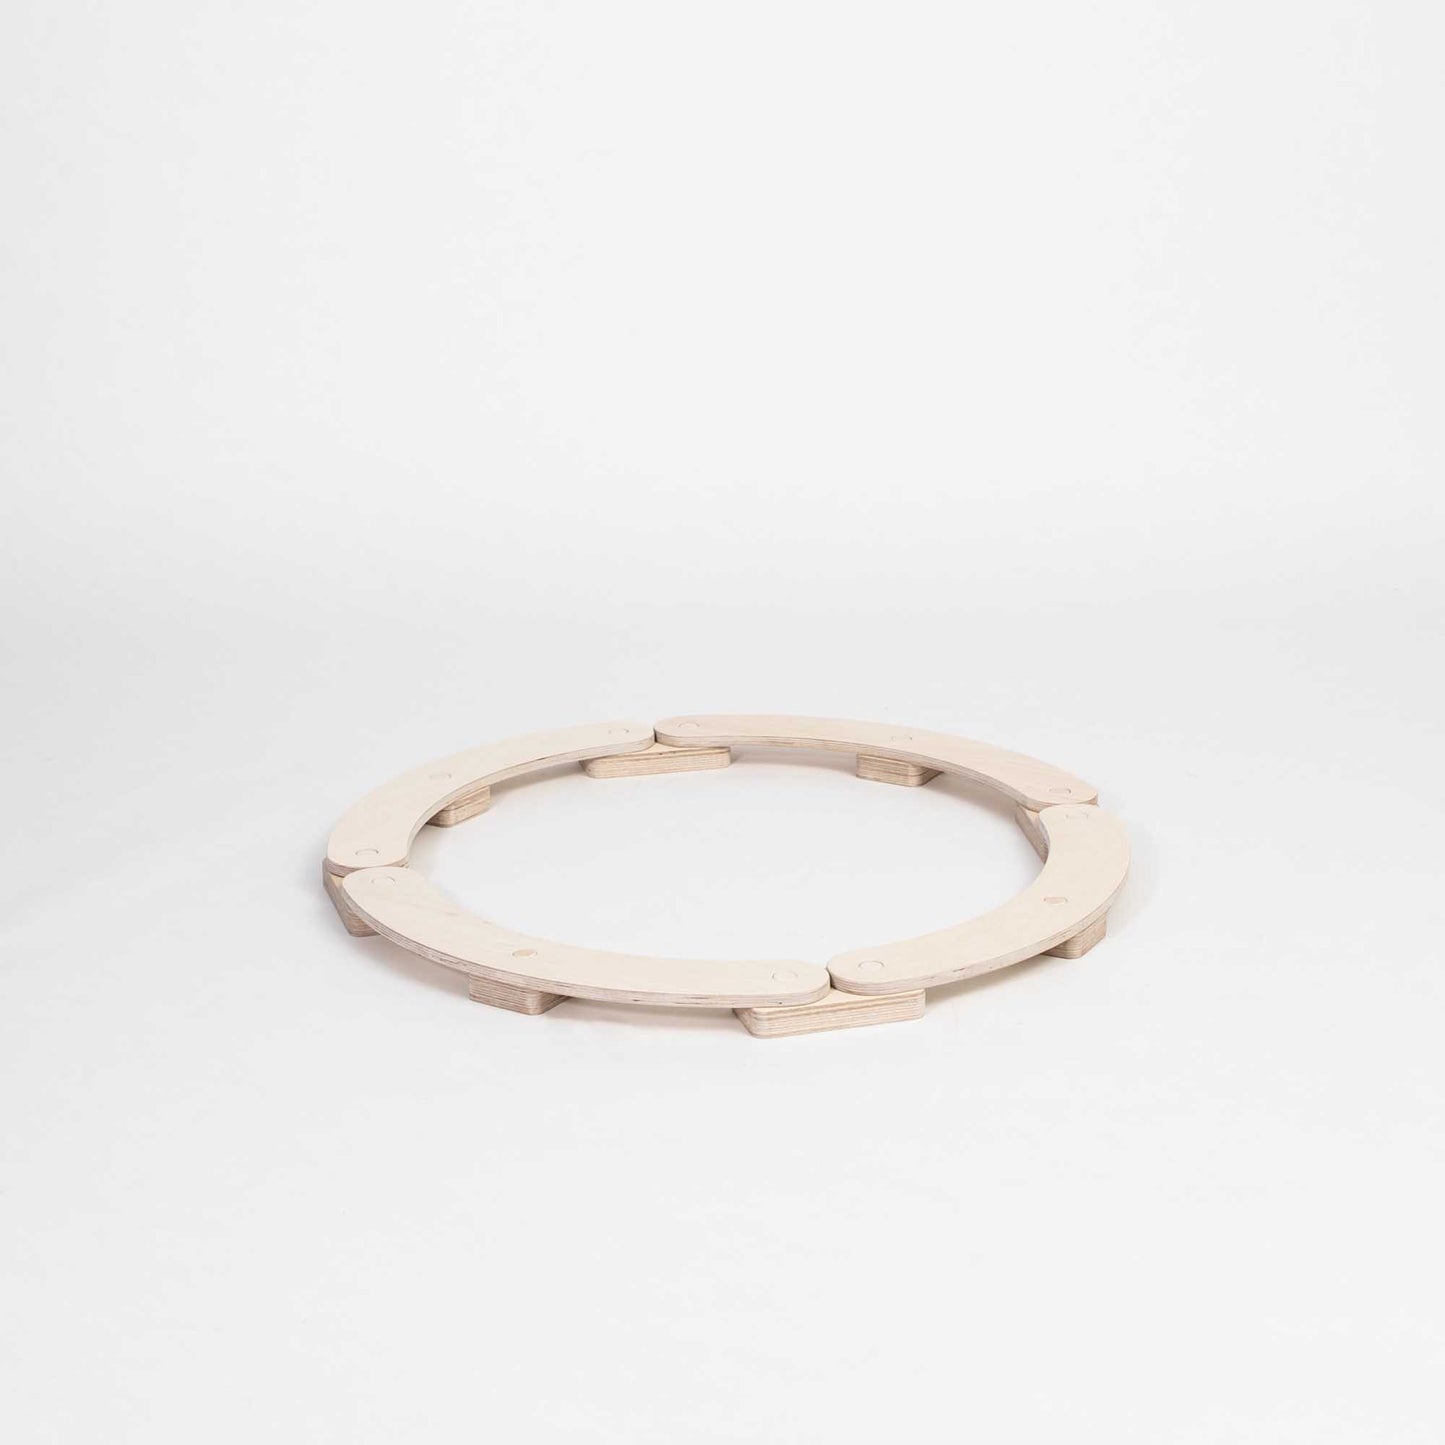 A Round balance beam with a wooden ring on a white background.